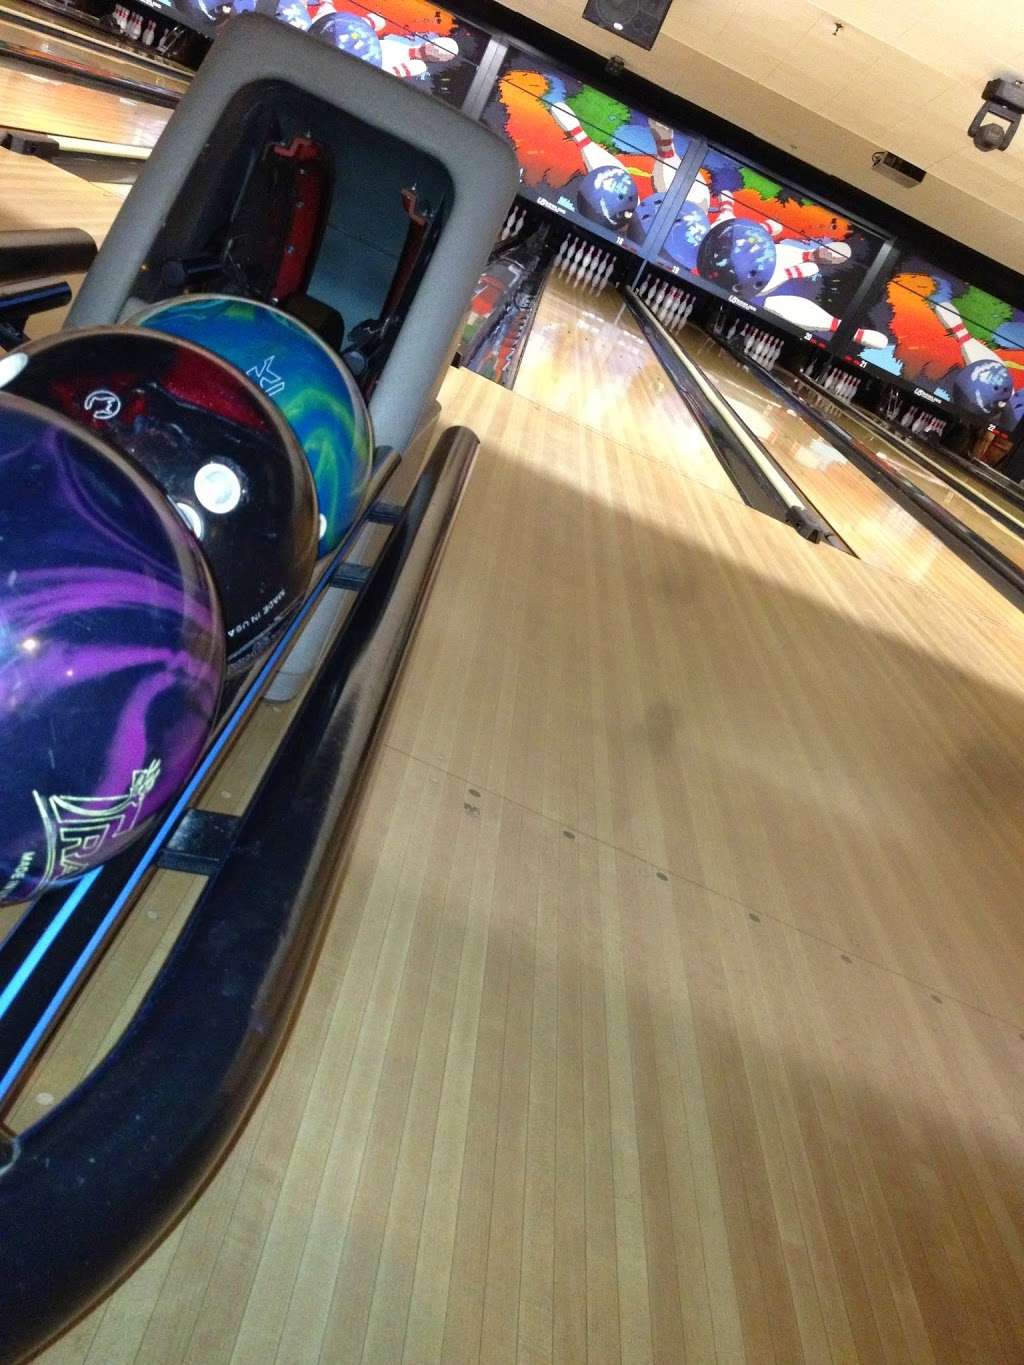 Gage Bowl, Huntington Park, CA's favorite bowling alley and family